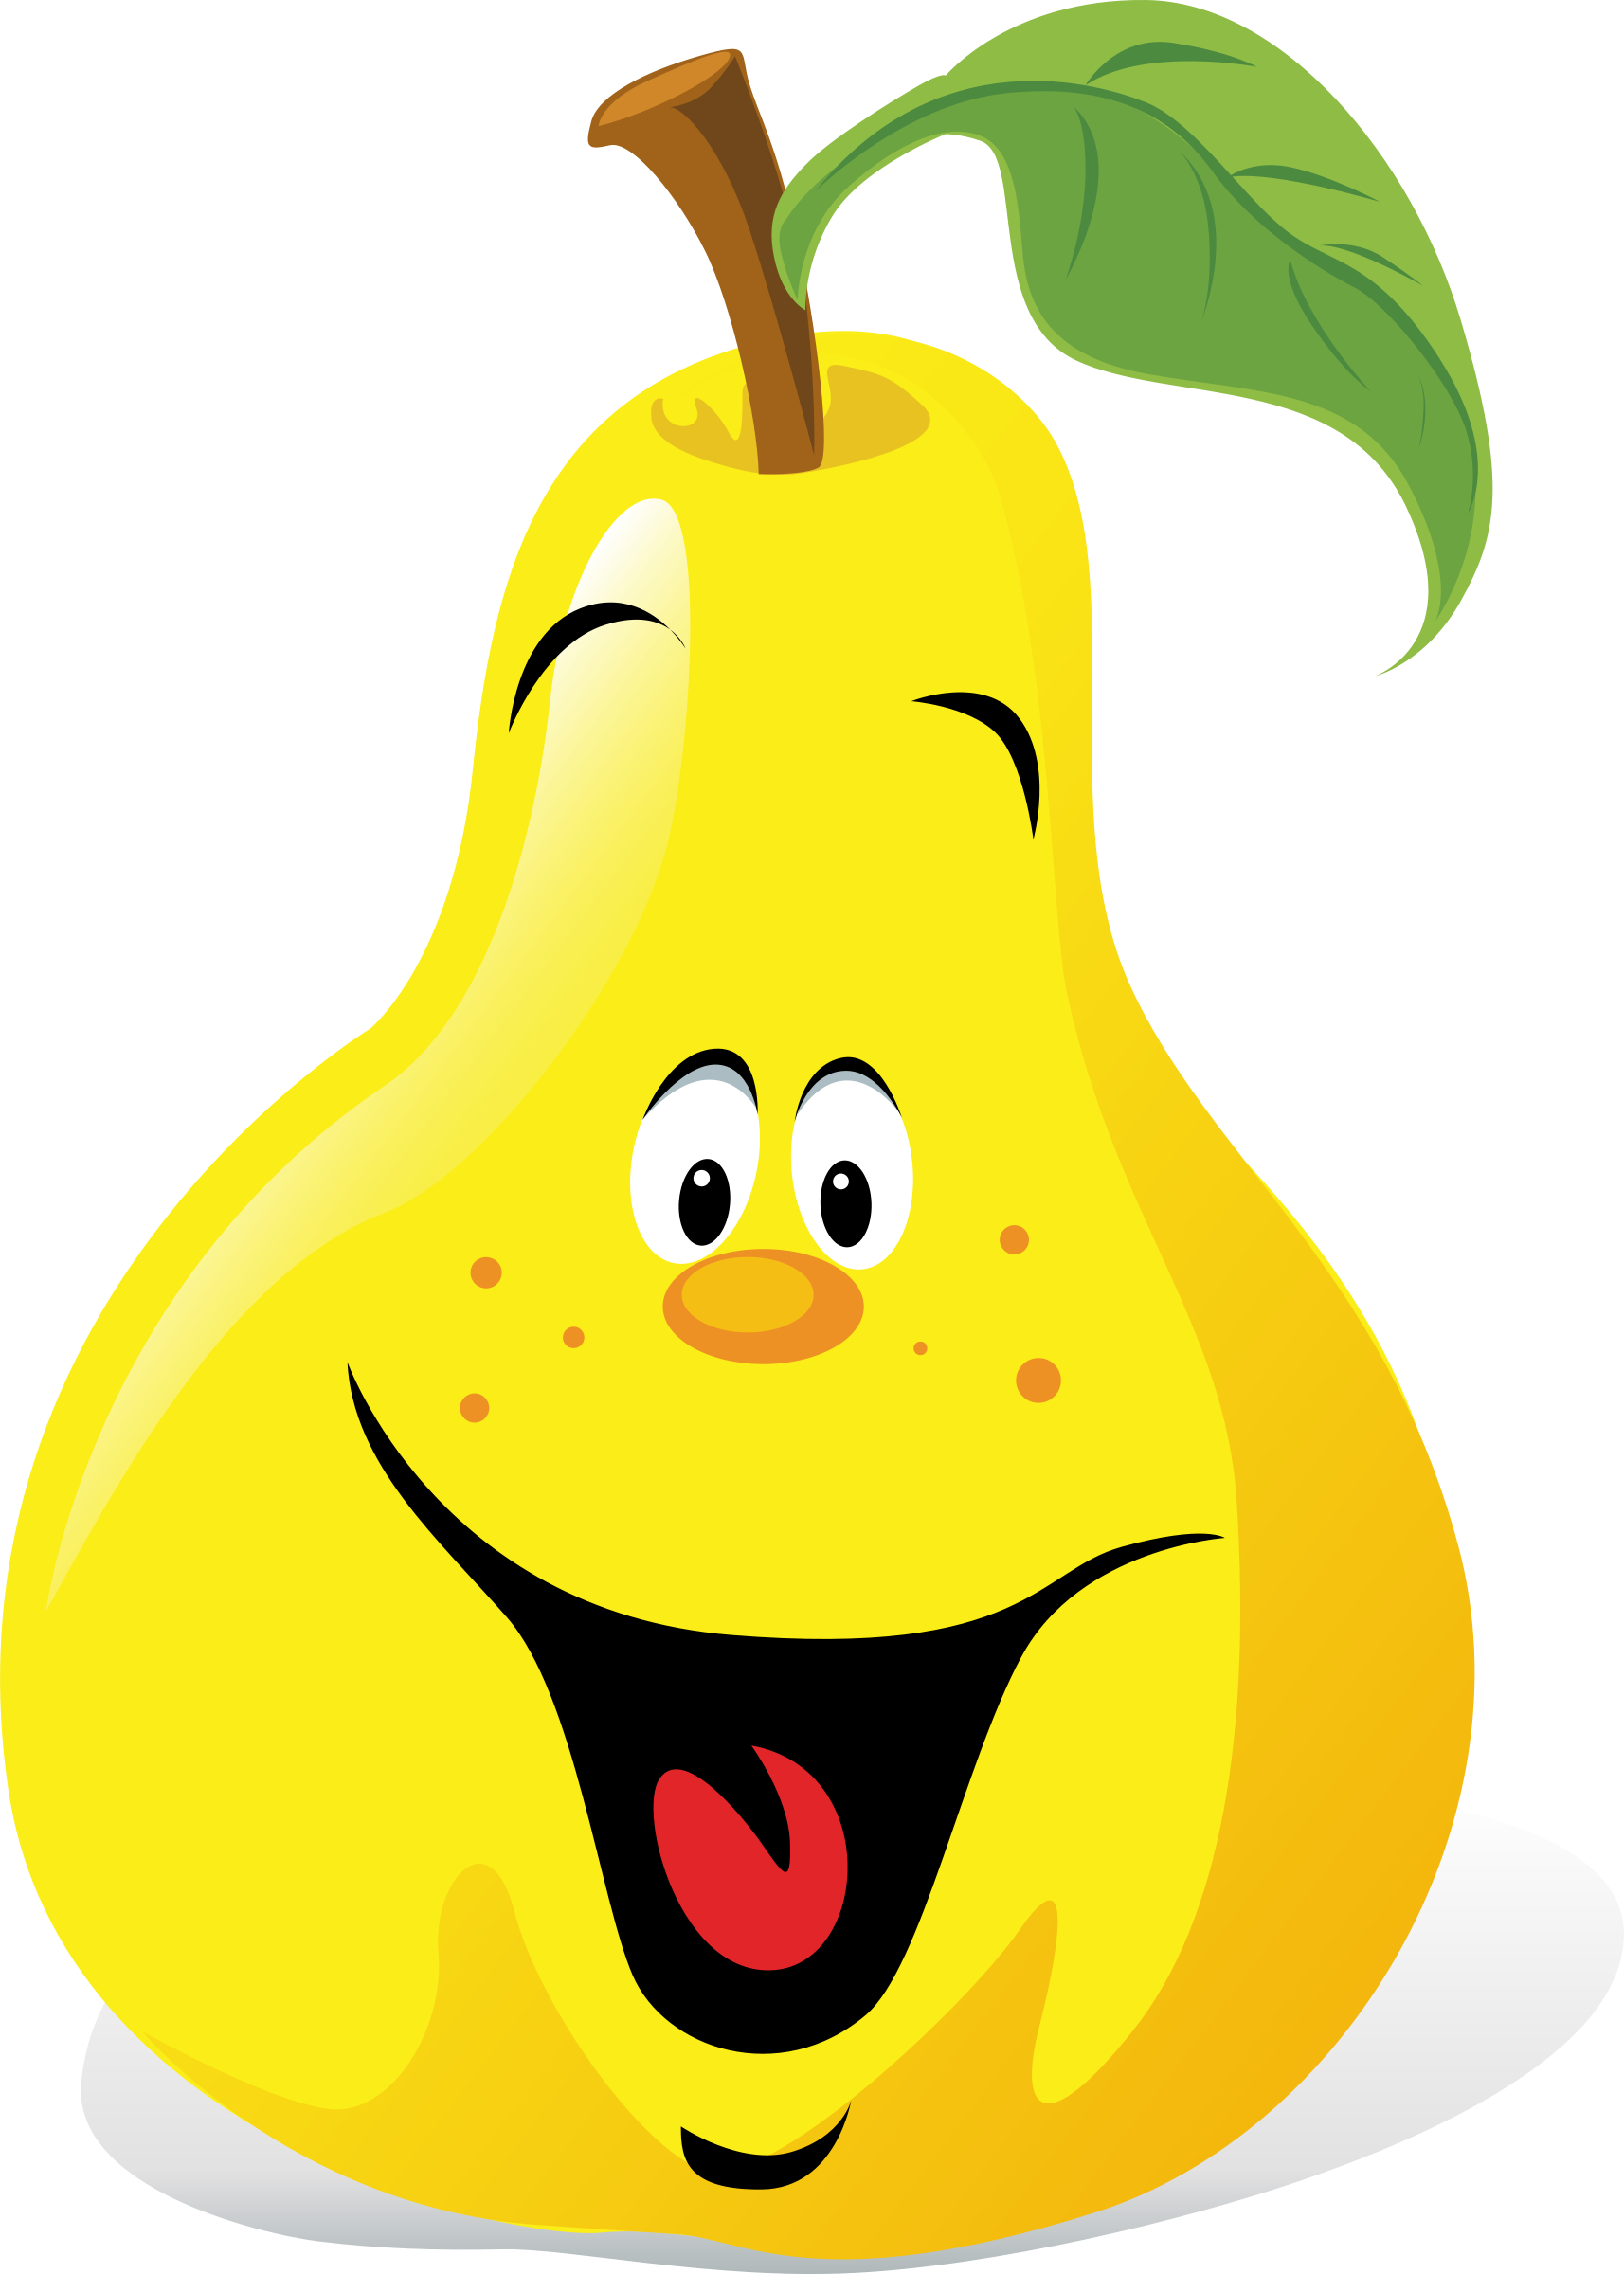 Pear clipart #6, Download drawings